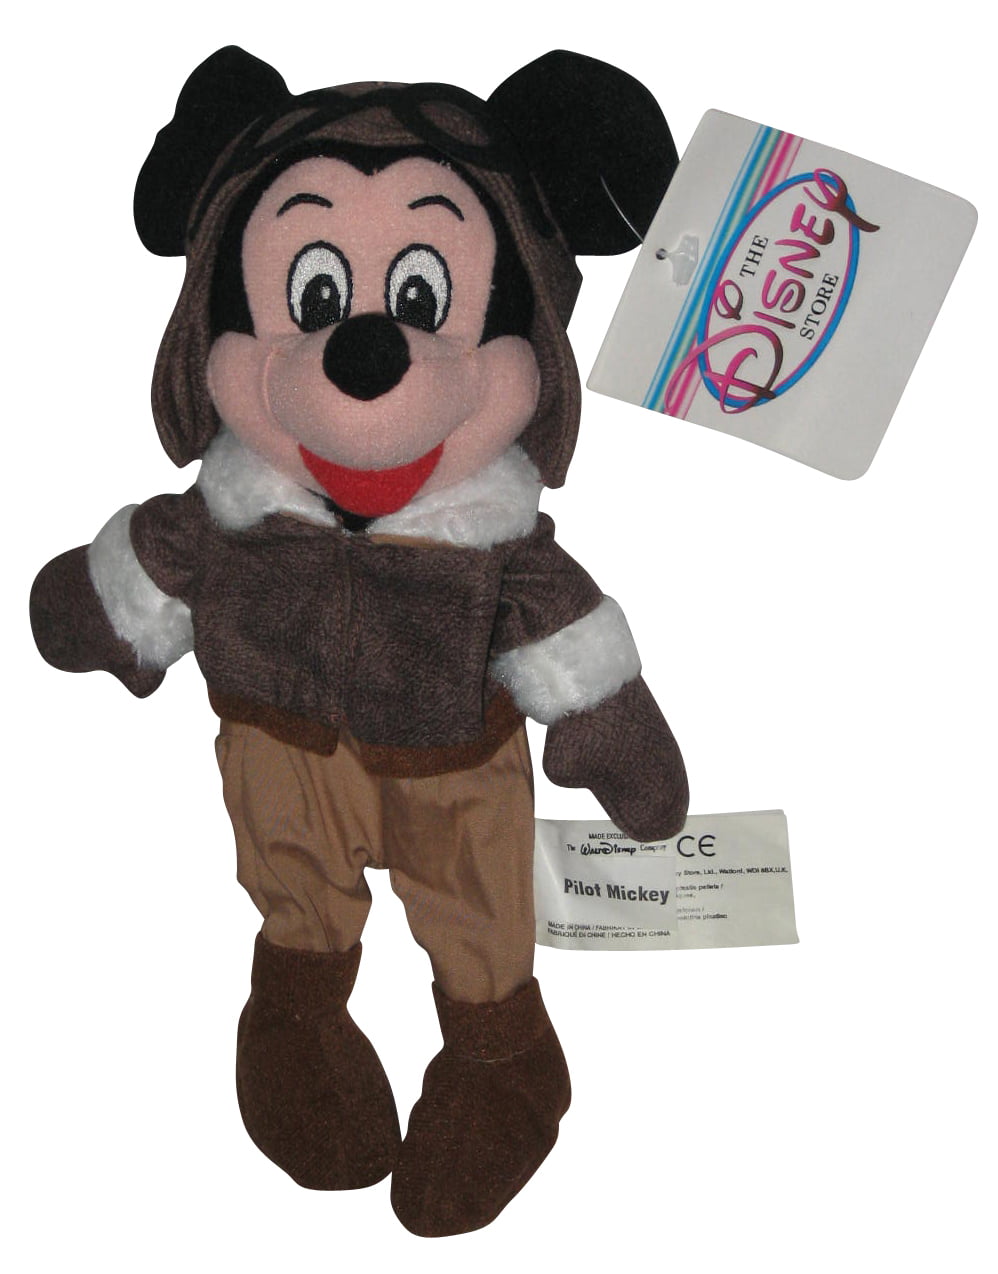 Disney Pilot Mickey Mouse Bean Bag Plush Toy 10in Stuffed Animal Aviator for sale online 